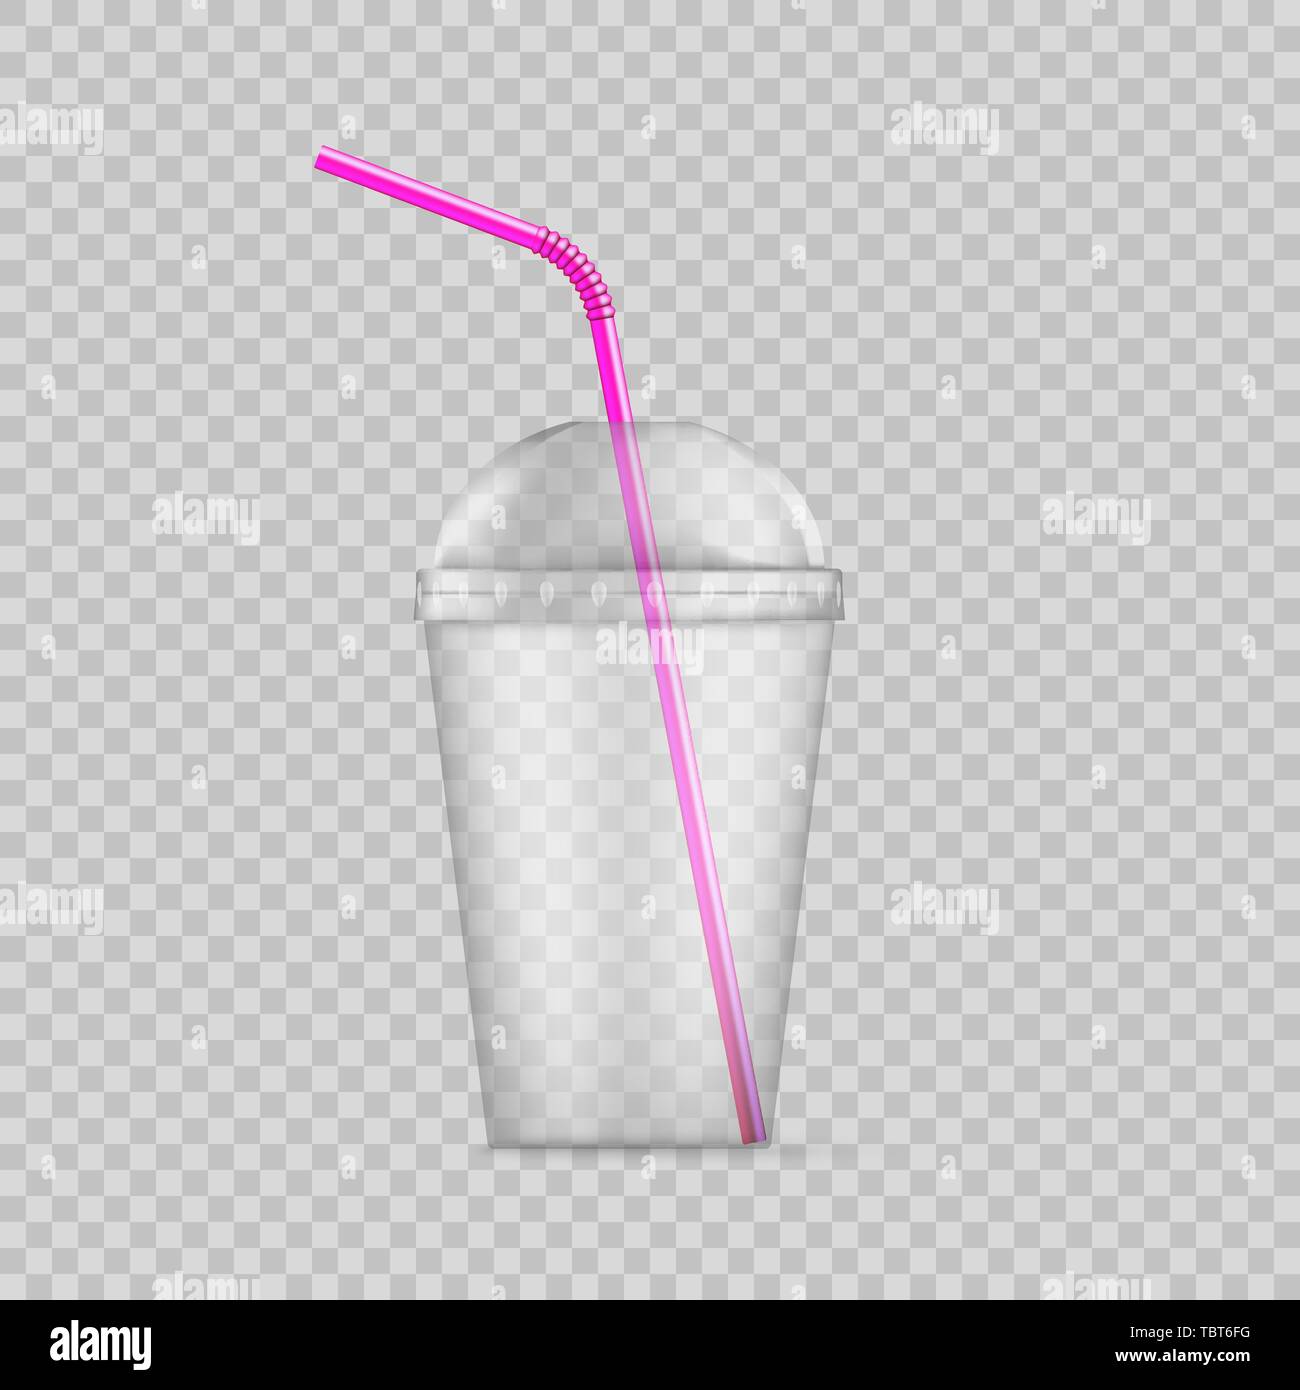 Transparent plastic disposable cup with straw. Disposable container for drink. Vector illustration isolated on transparent background Stock Vector